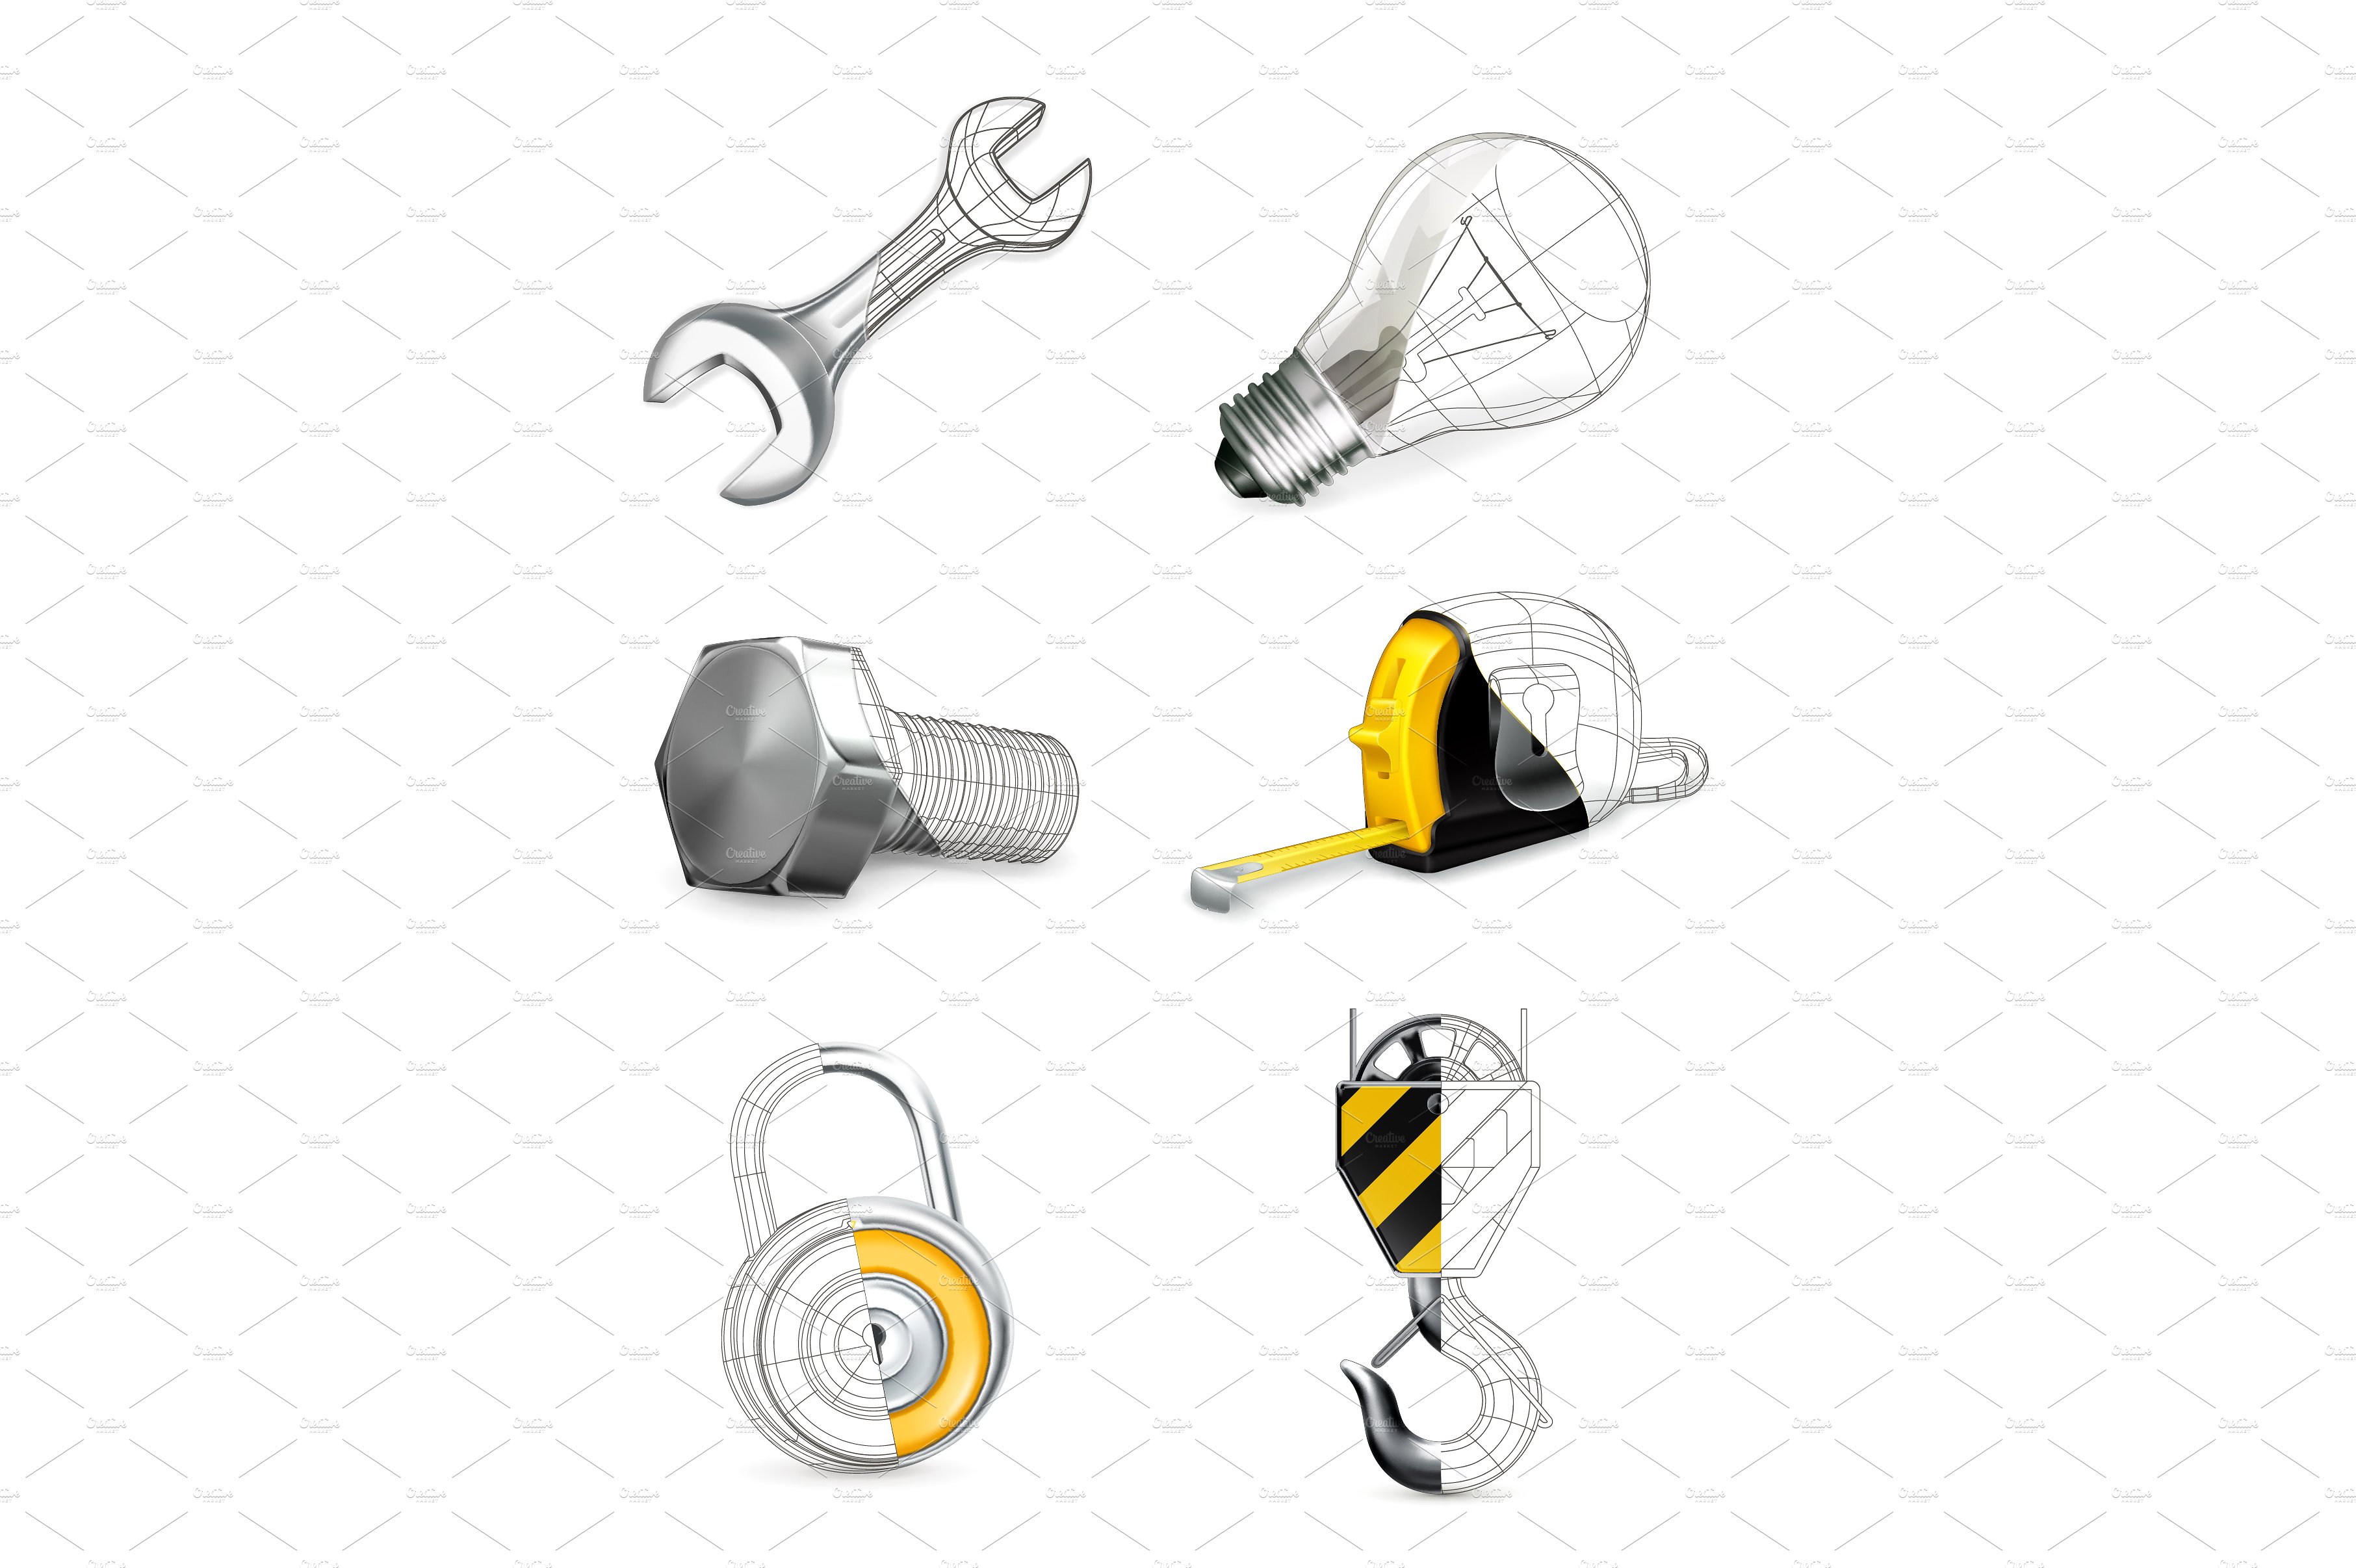 Realistic & Drafted Construction Tools